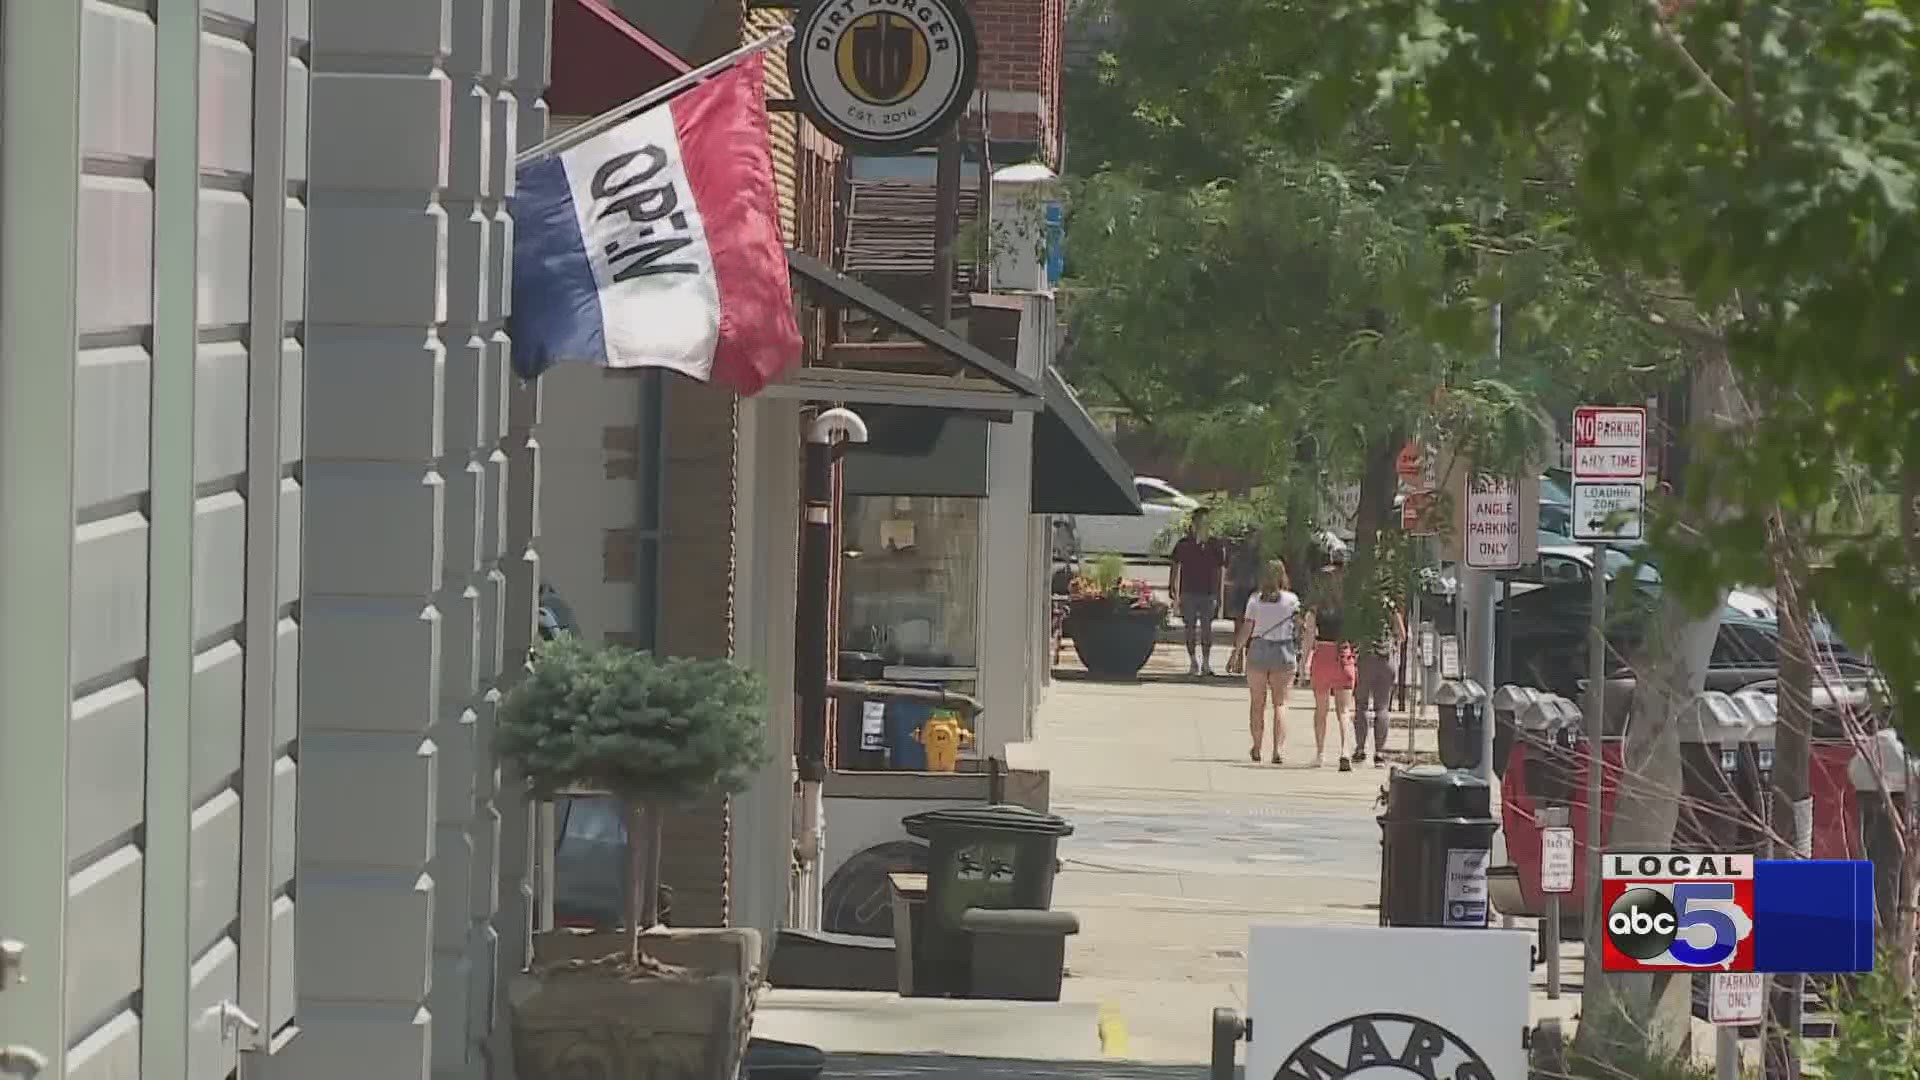 Bill looks to help shield Iowa businesses and local businesses from claims arising out of COVID-19. Local 5's Rachel Droze reports.